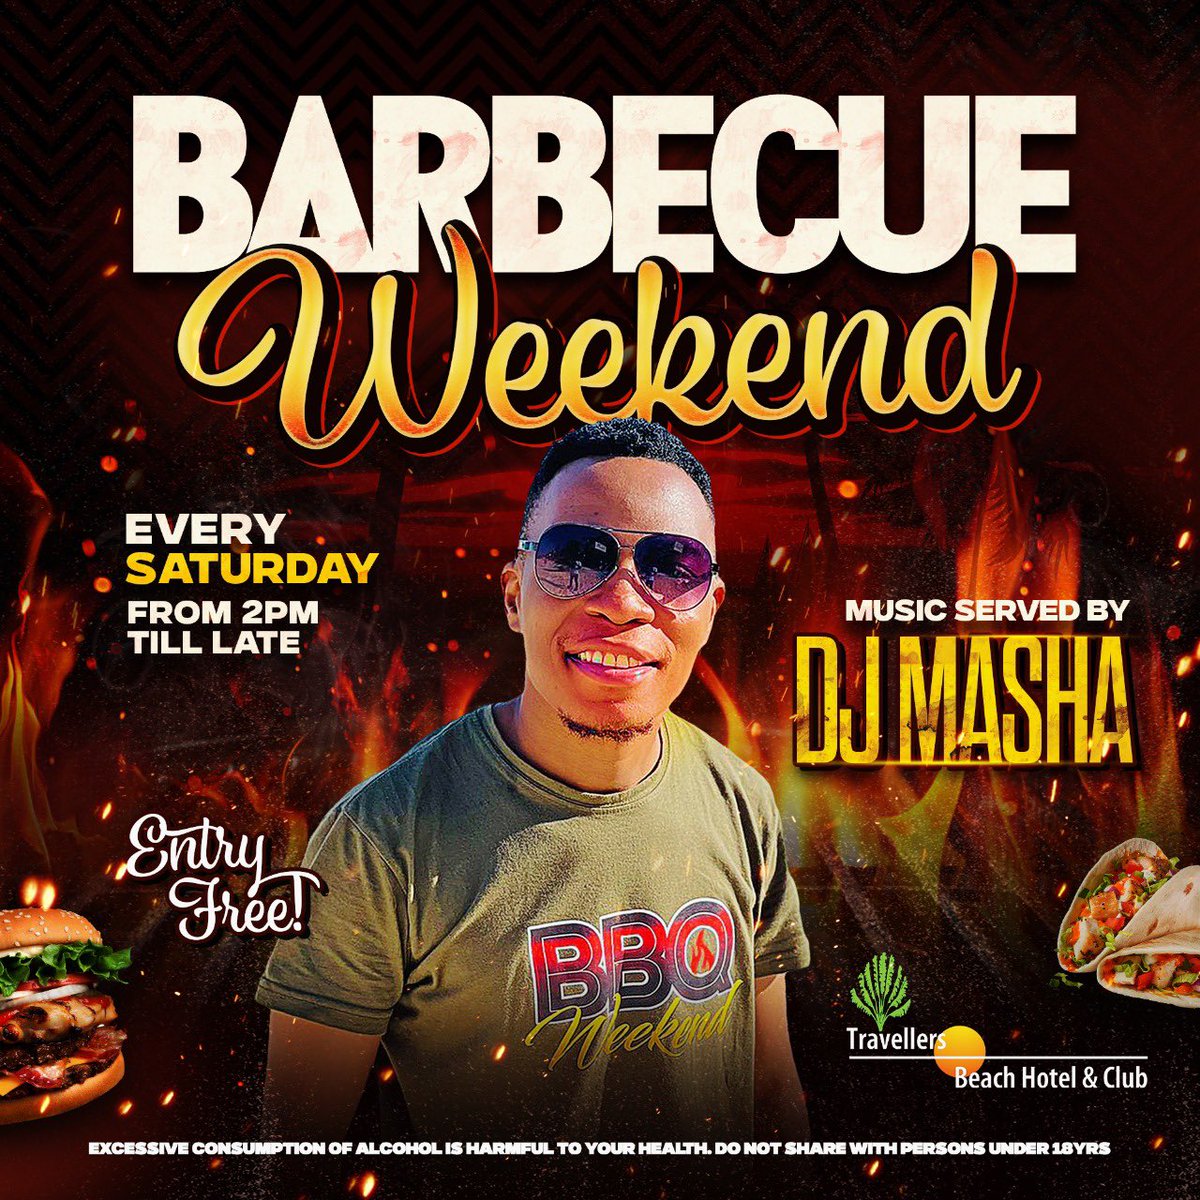 Introducing @barbequeweekend Day time party 🥳🔥🔥 every Saturday from 2pm with @djmashakenya inside @travellersbhc . Bring your Friends! ☀️ 🏖

#BarbecueWeekend #Events254 #254fashion #254publicity #IgersKenya #MagicalKenya #TembeaKenya #Weekend #explorepage